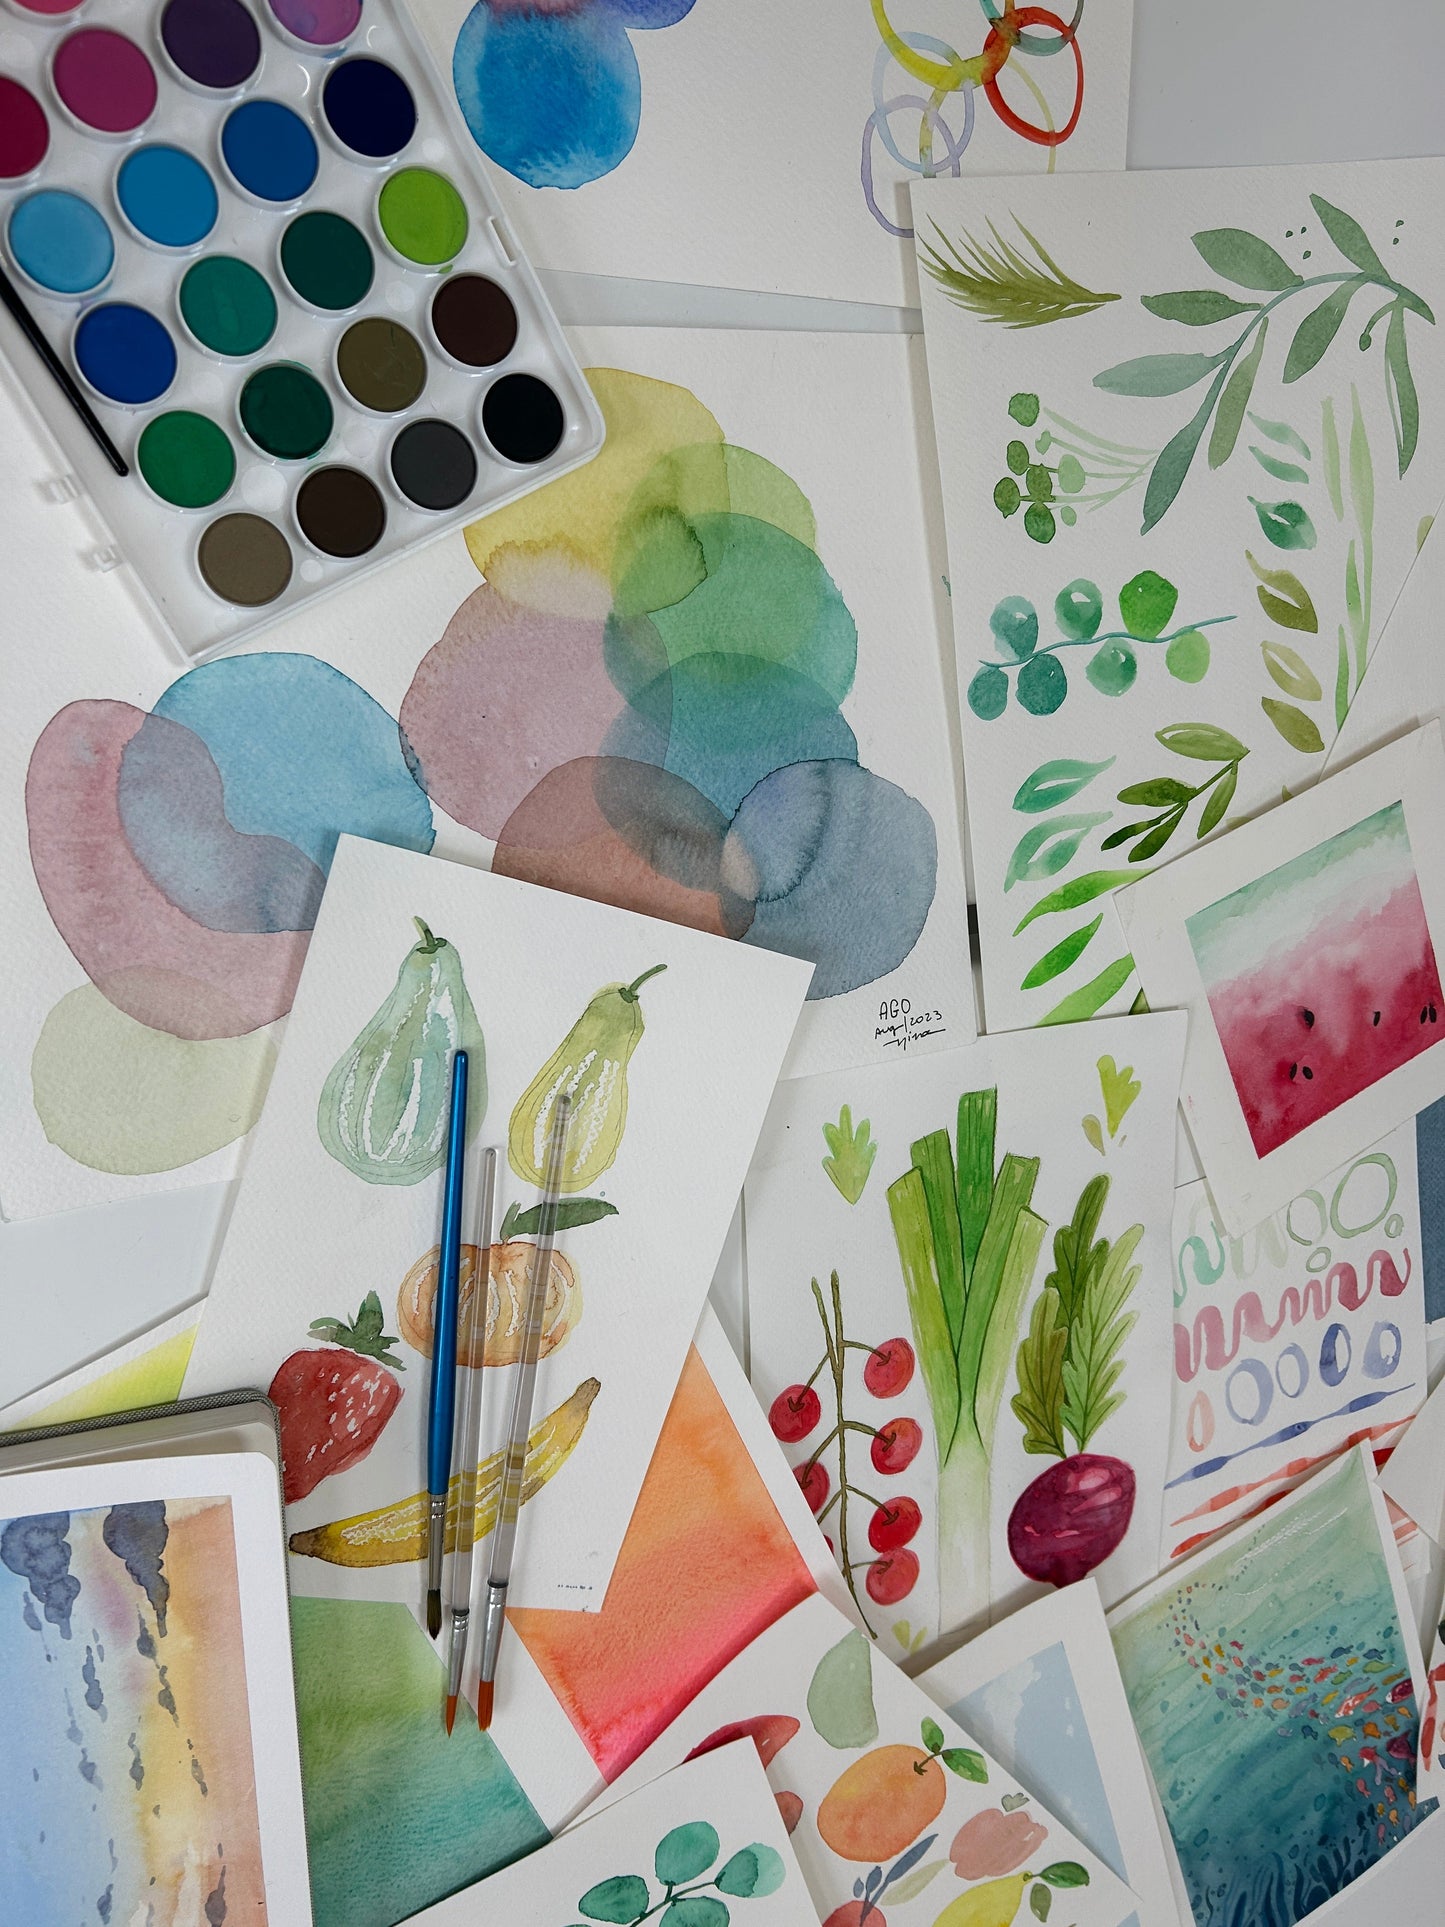 Introduction to Watercolour Workshop - Sunday, April 28th